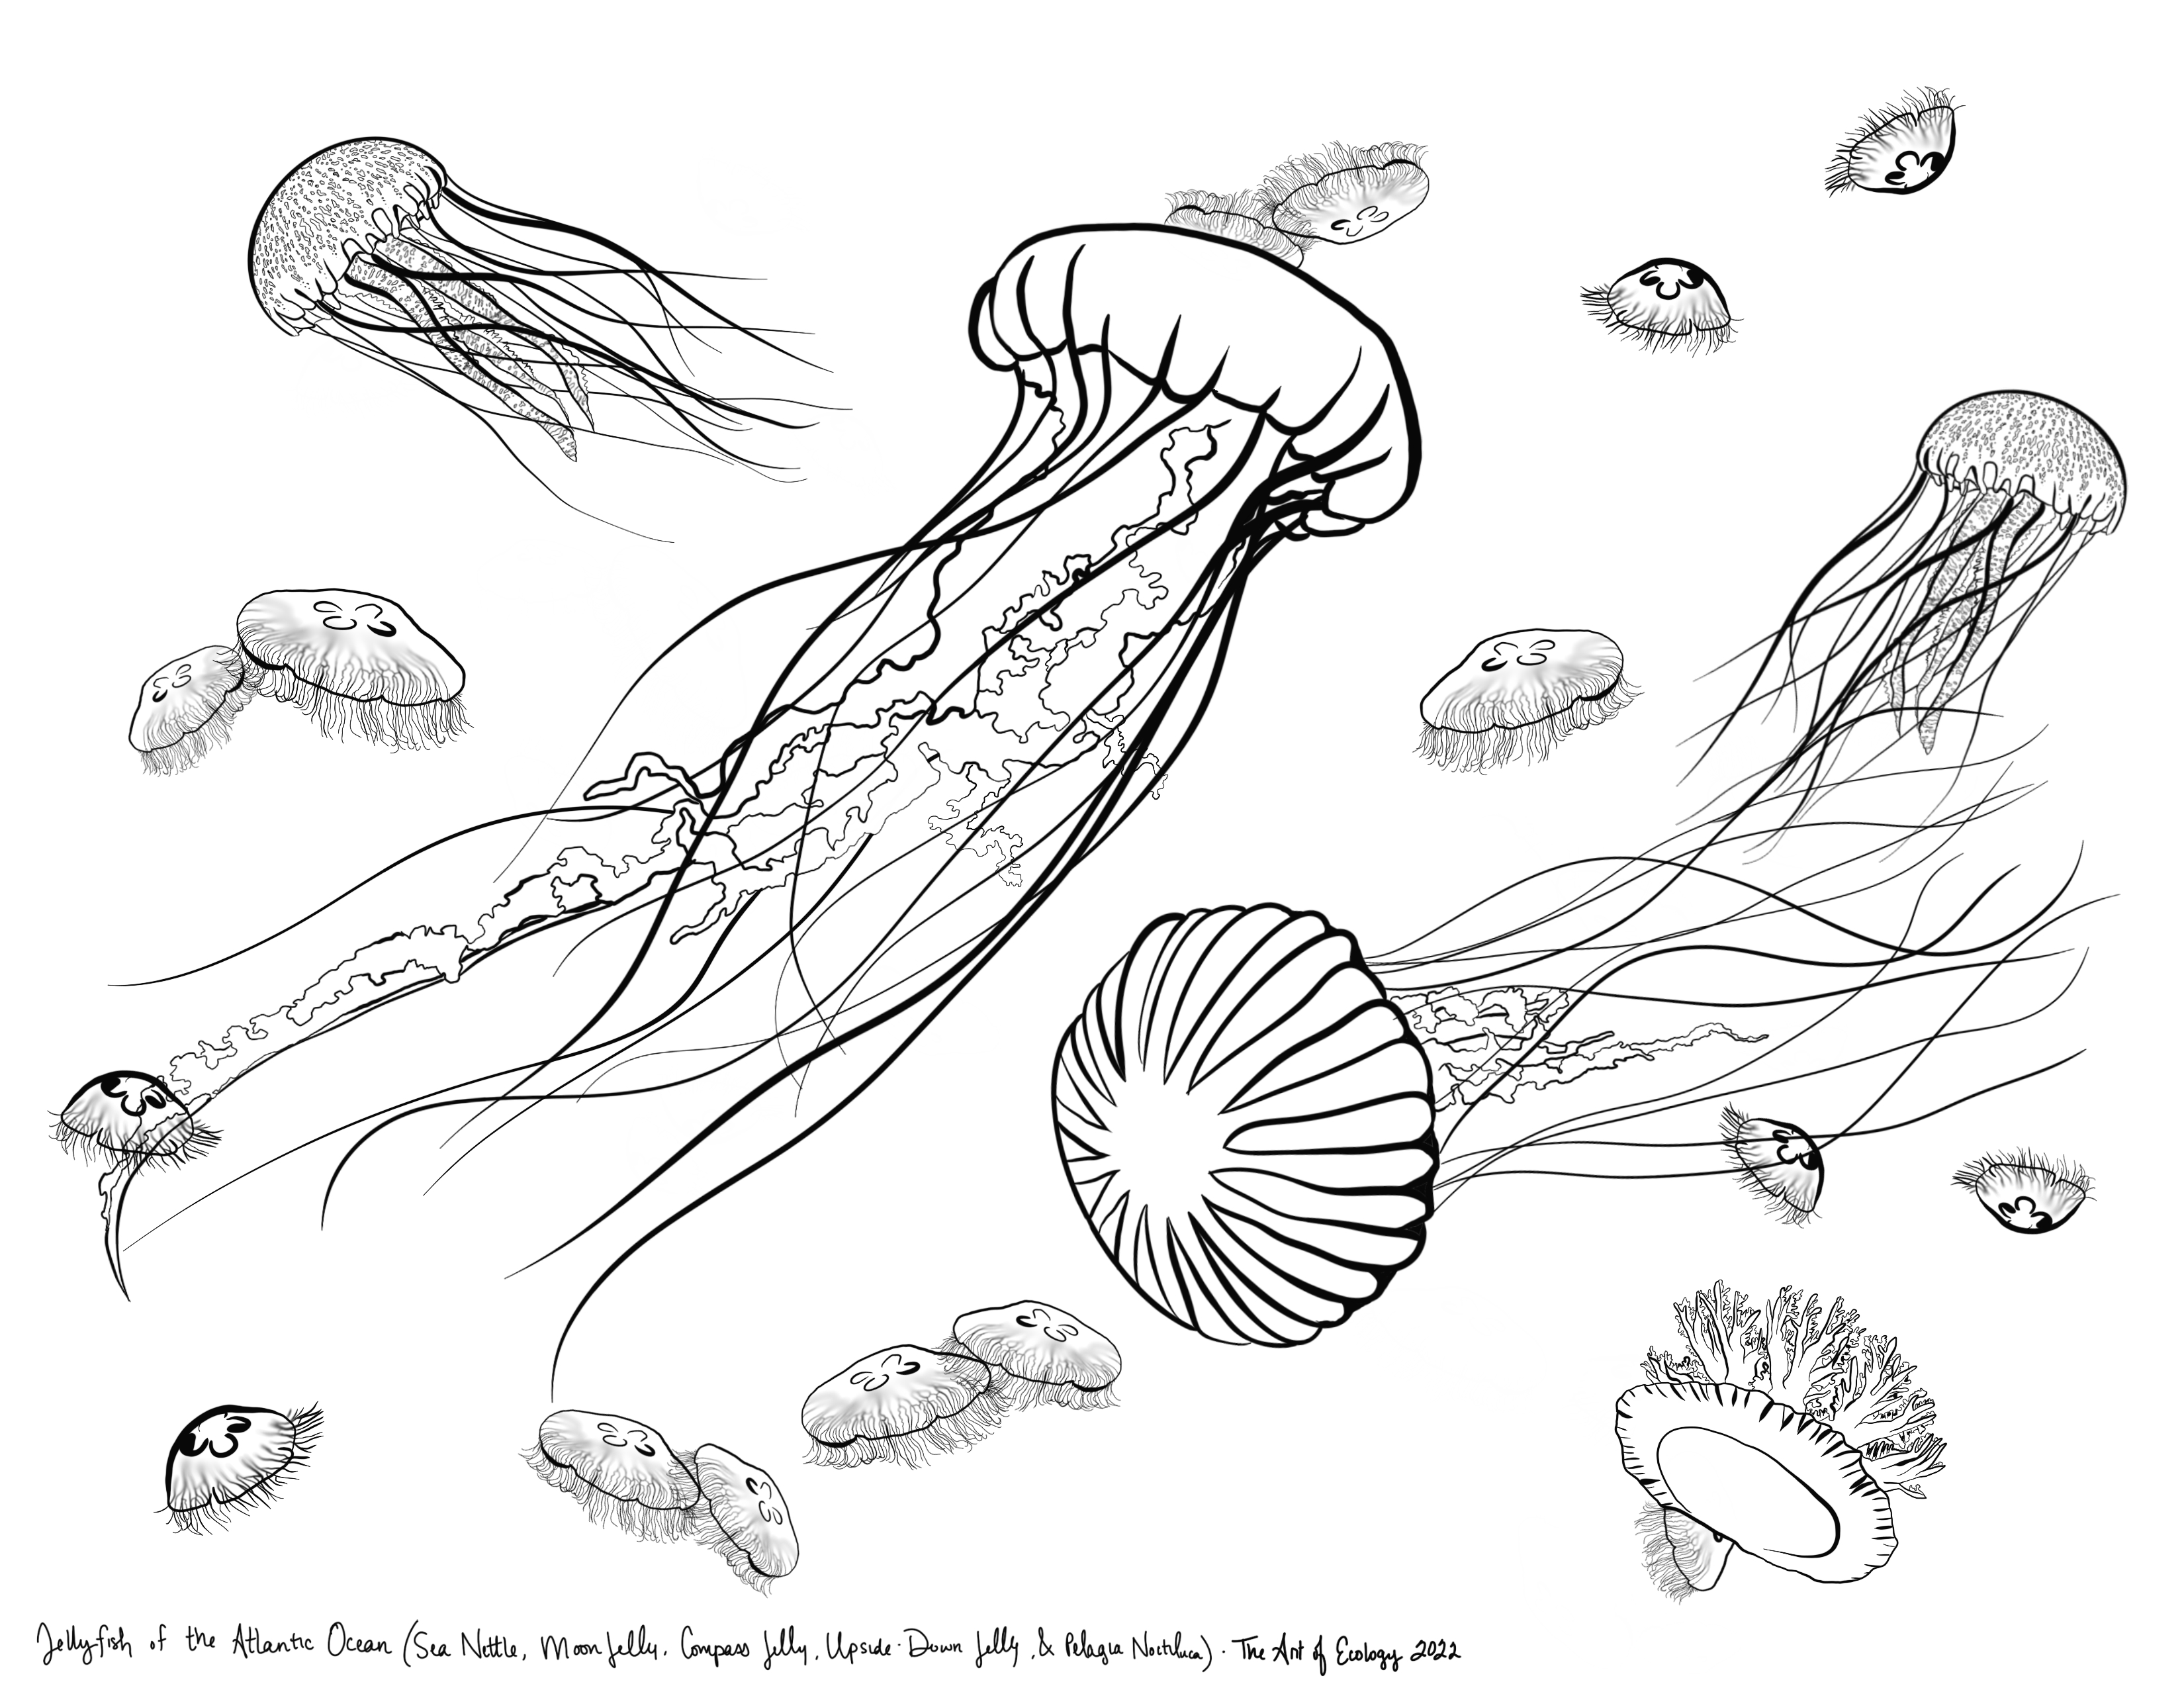 Marine Animals Coloring Page Bundle - The Art of Ecology